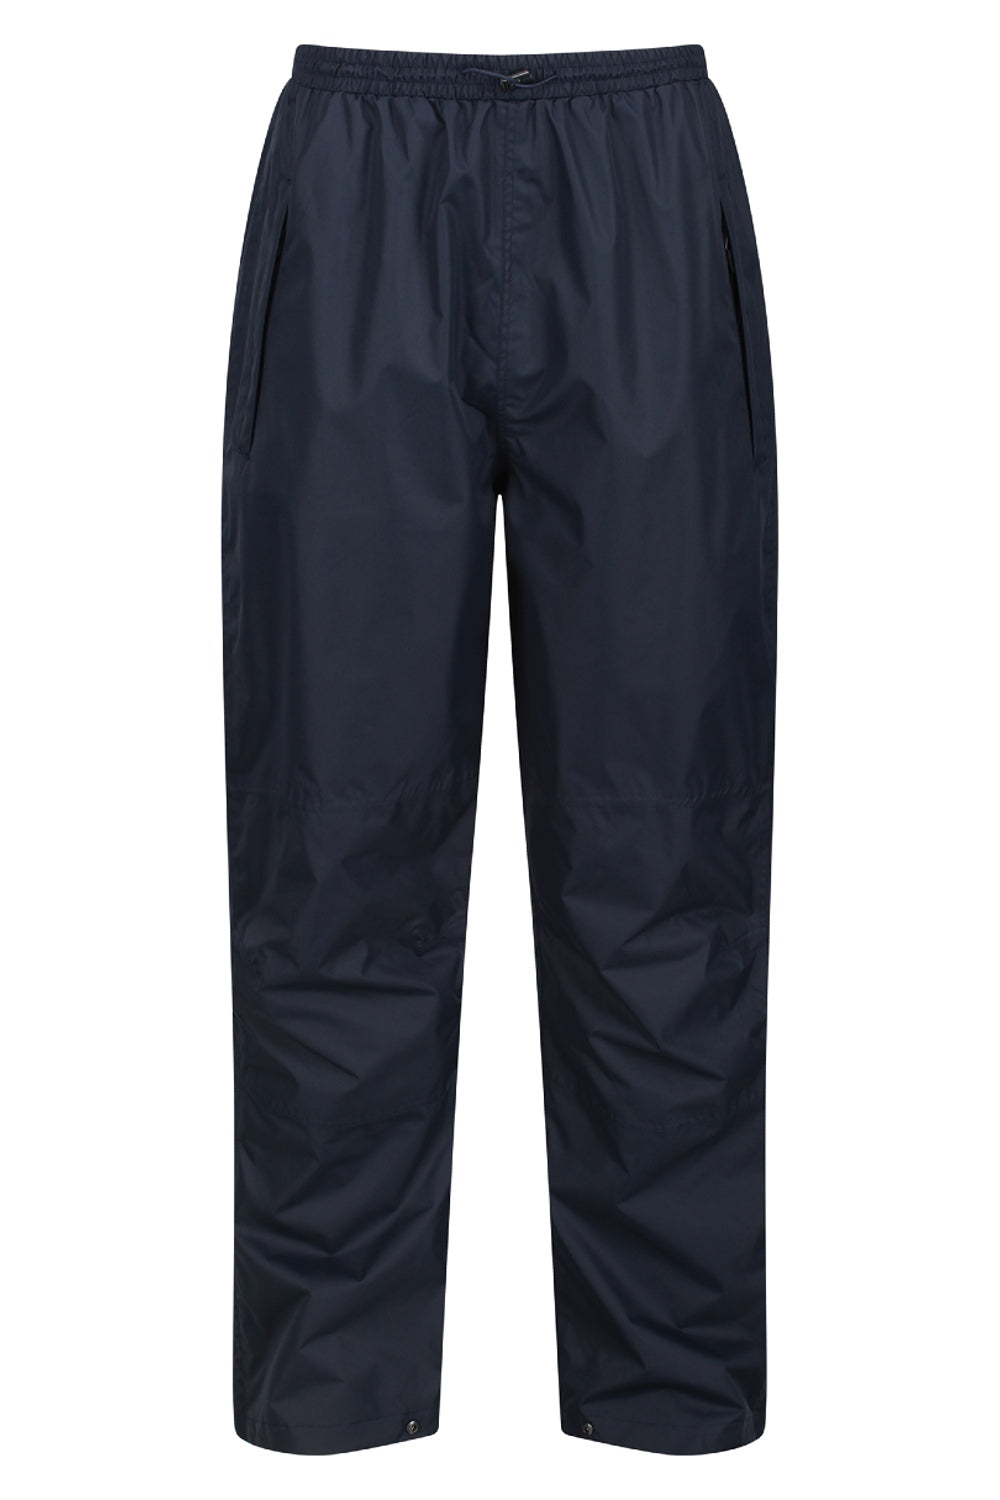 Regatta Linton Breathable Lined Overtrousers in Navy 